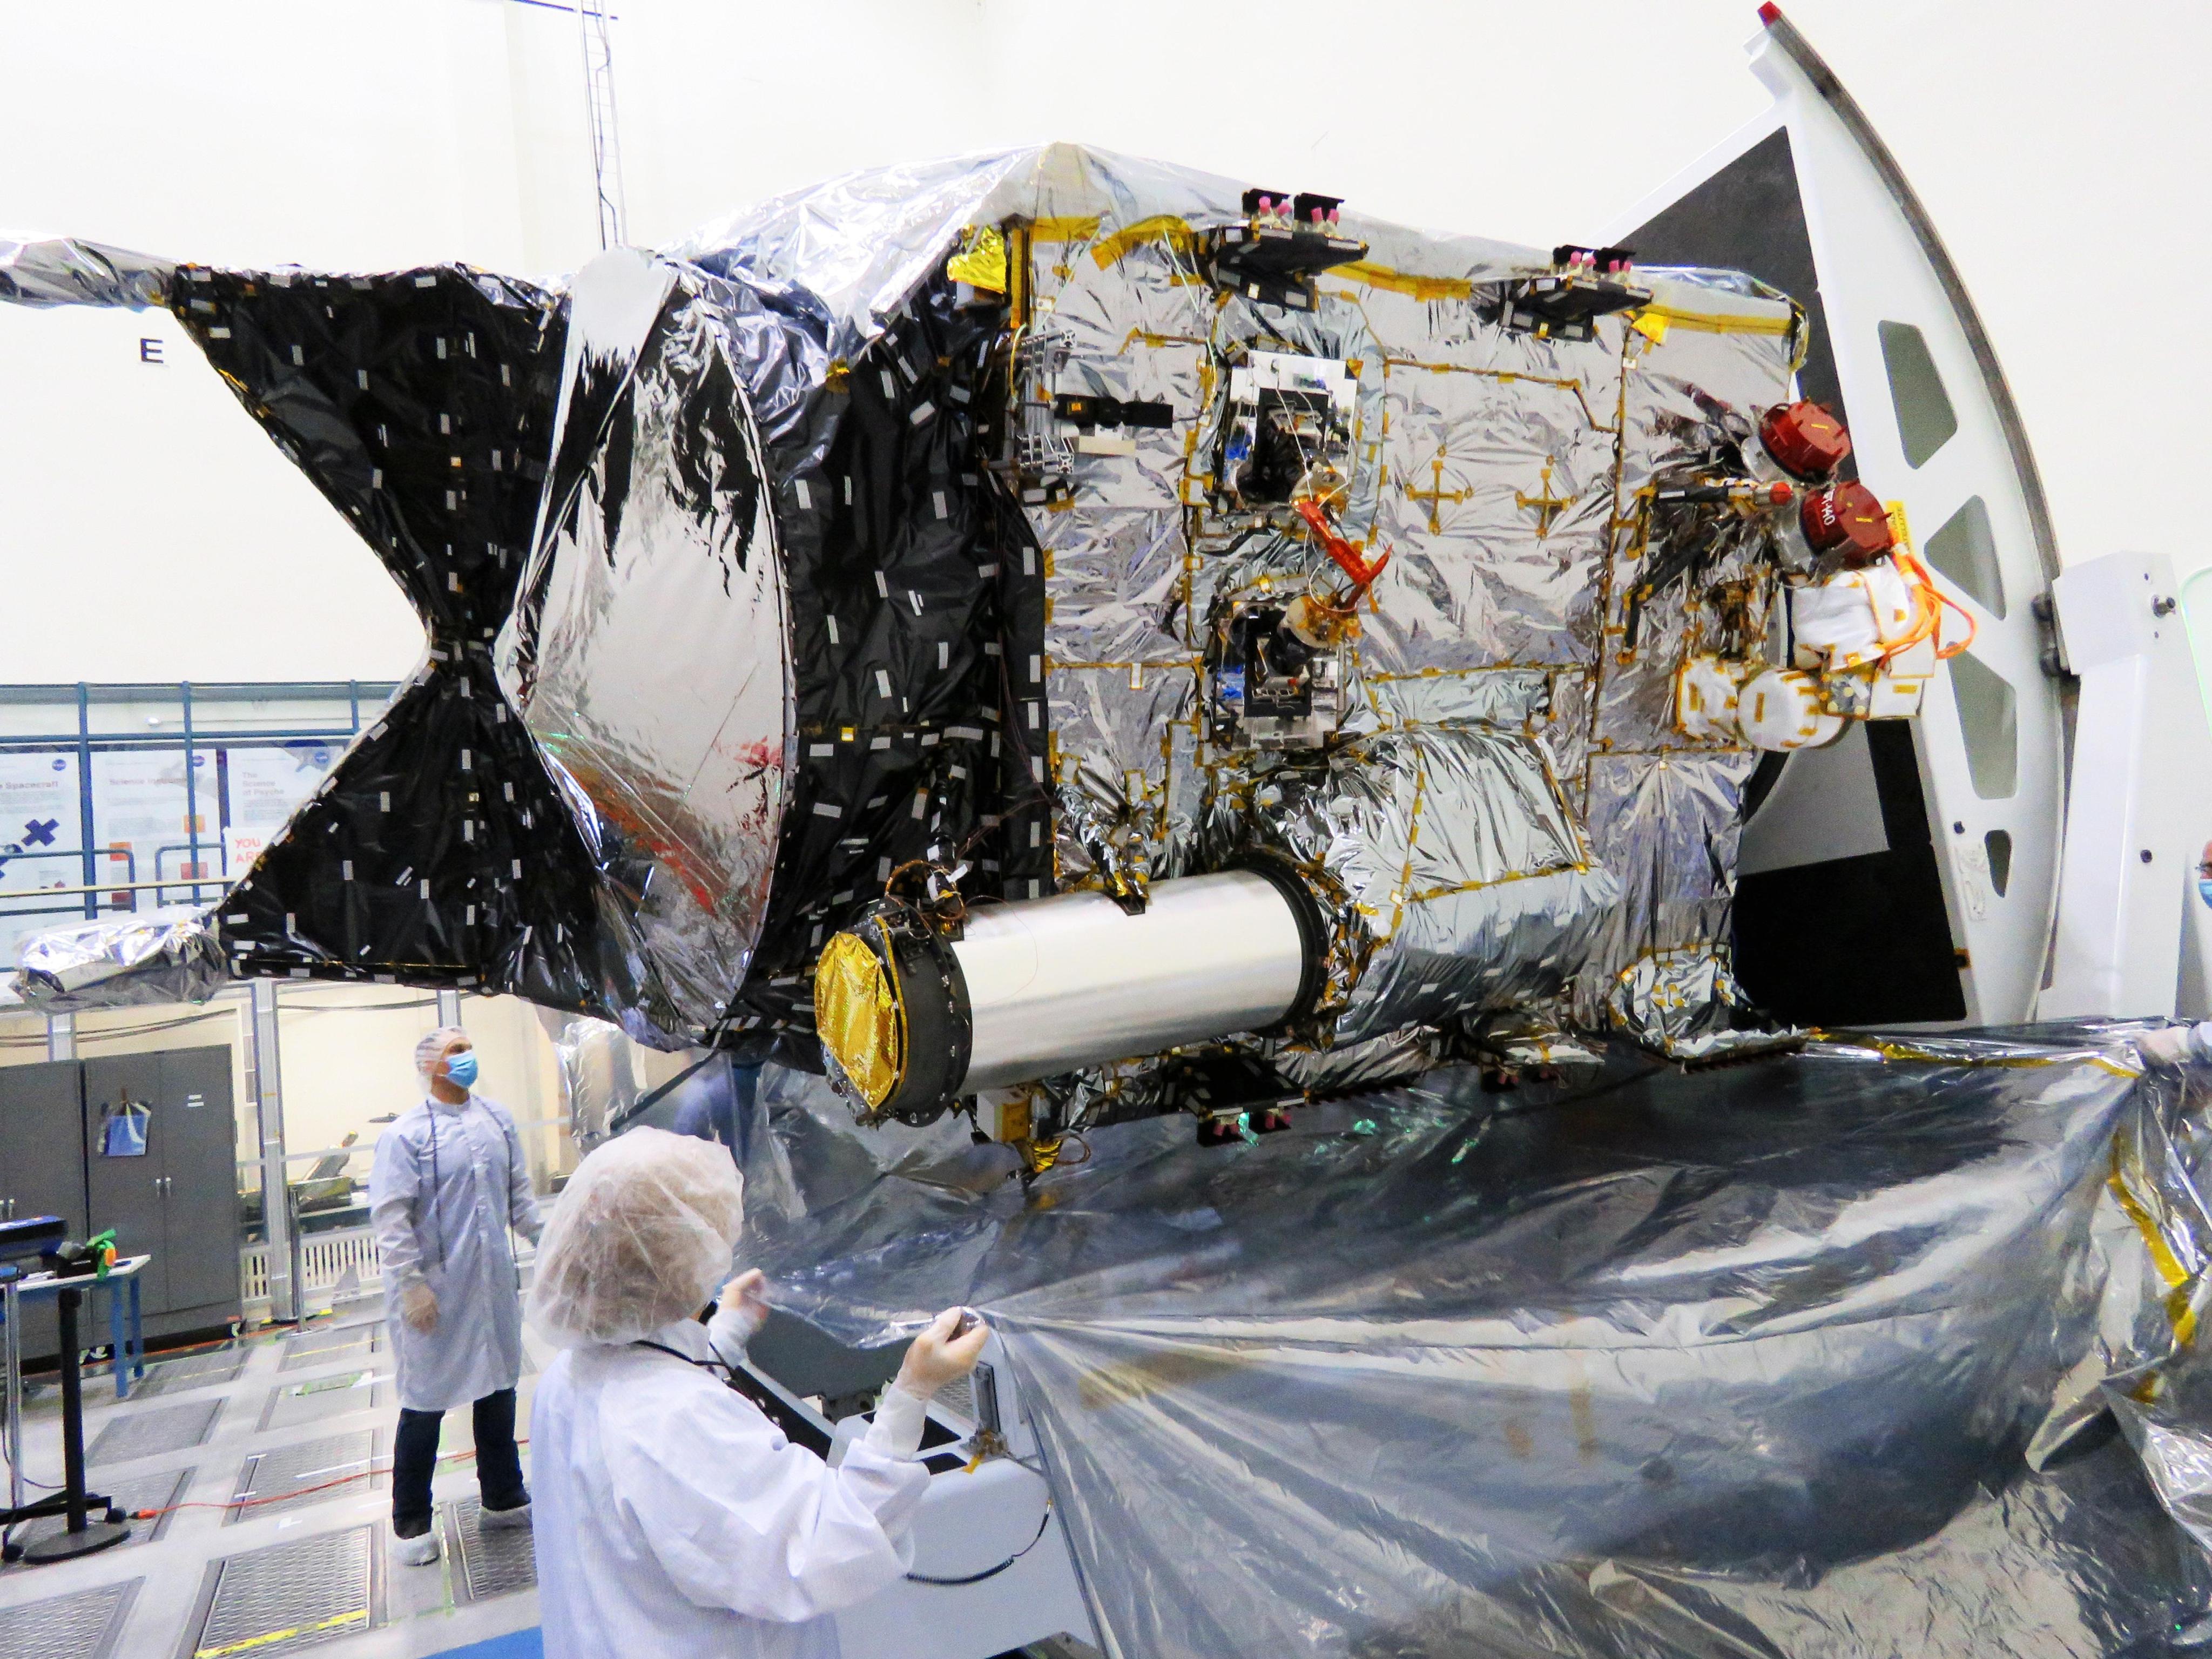 Workers stand near the Psyche spacecraft. One worker is holding the edges of a protective cover.